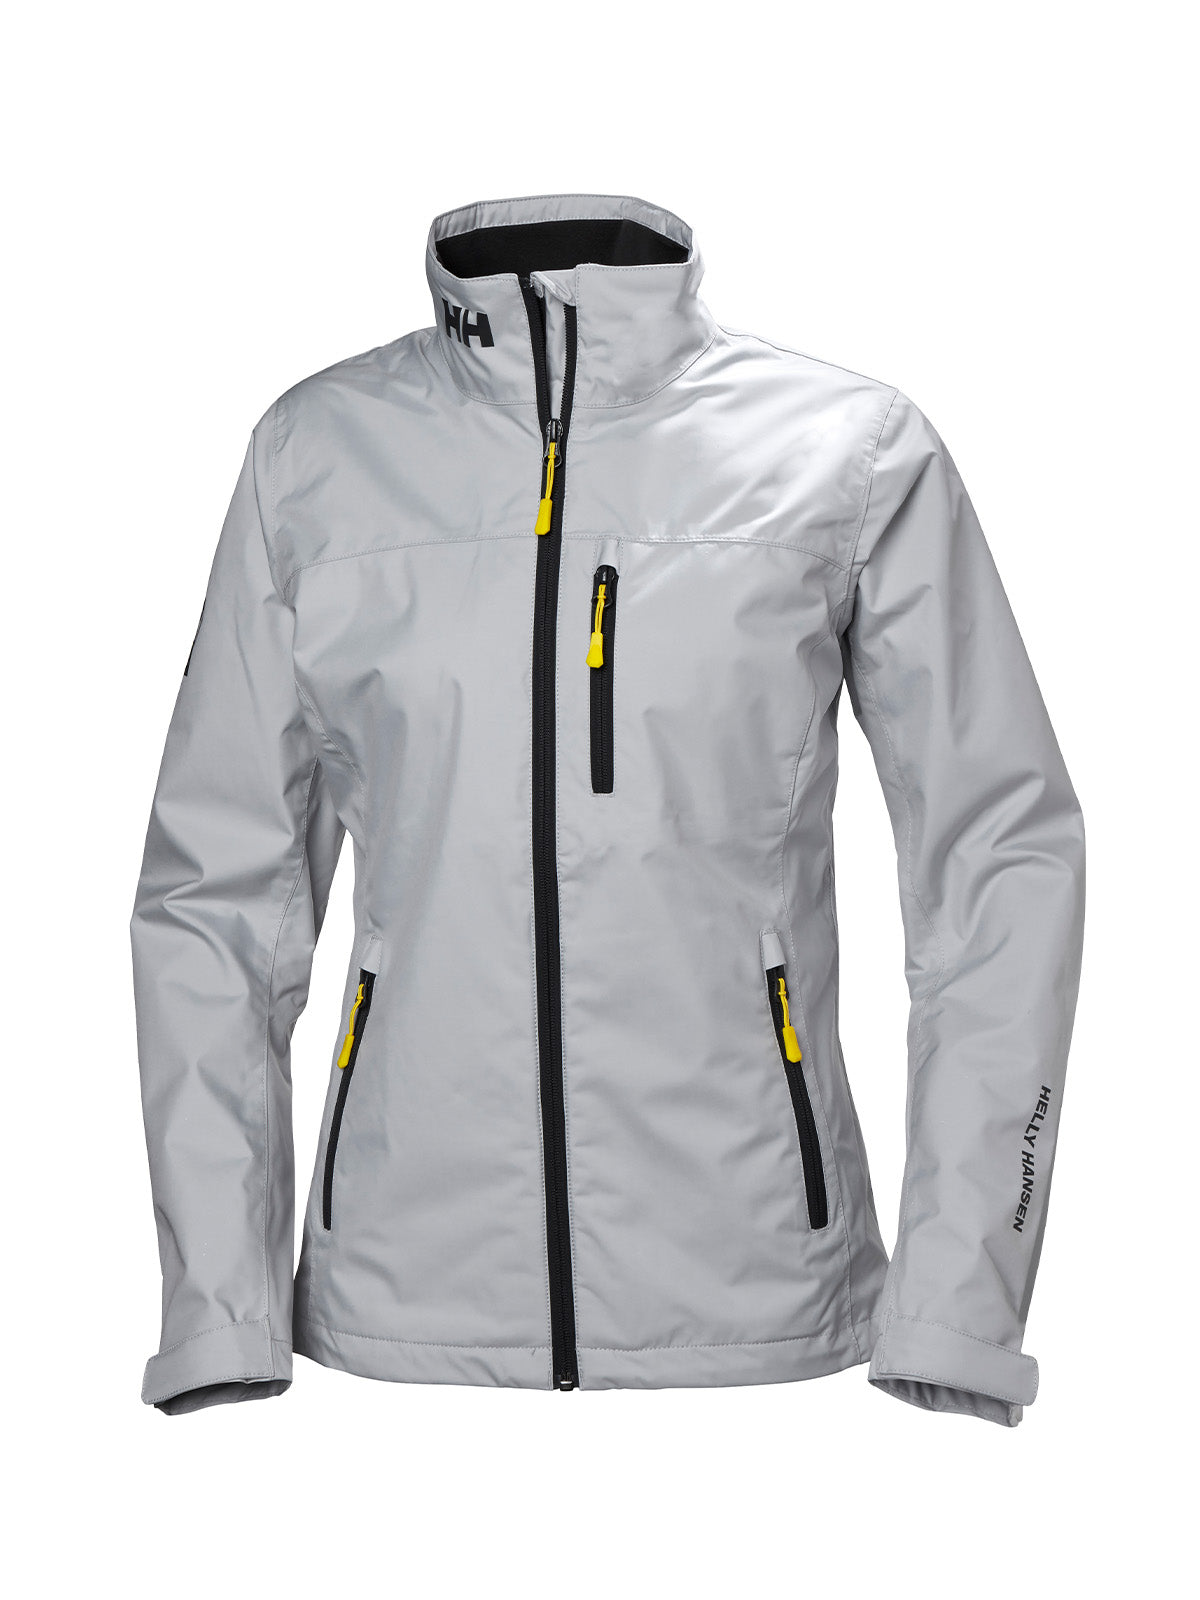 Crew Sailing Jacket for Women